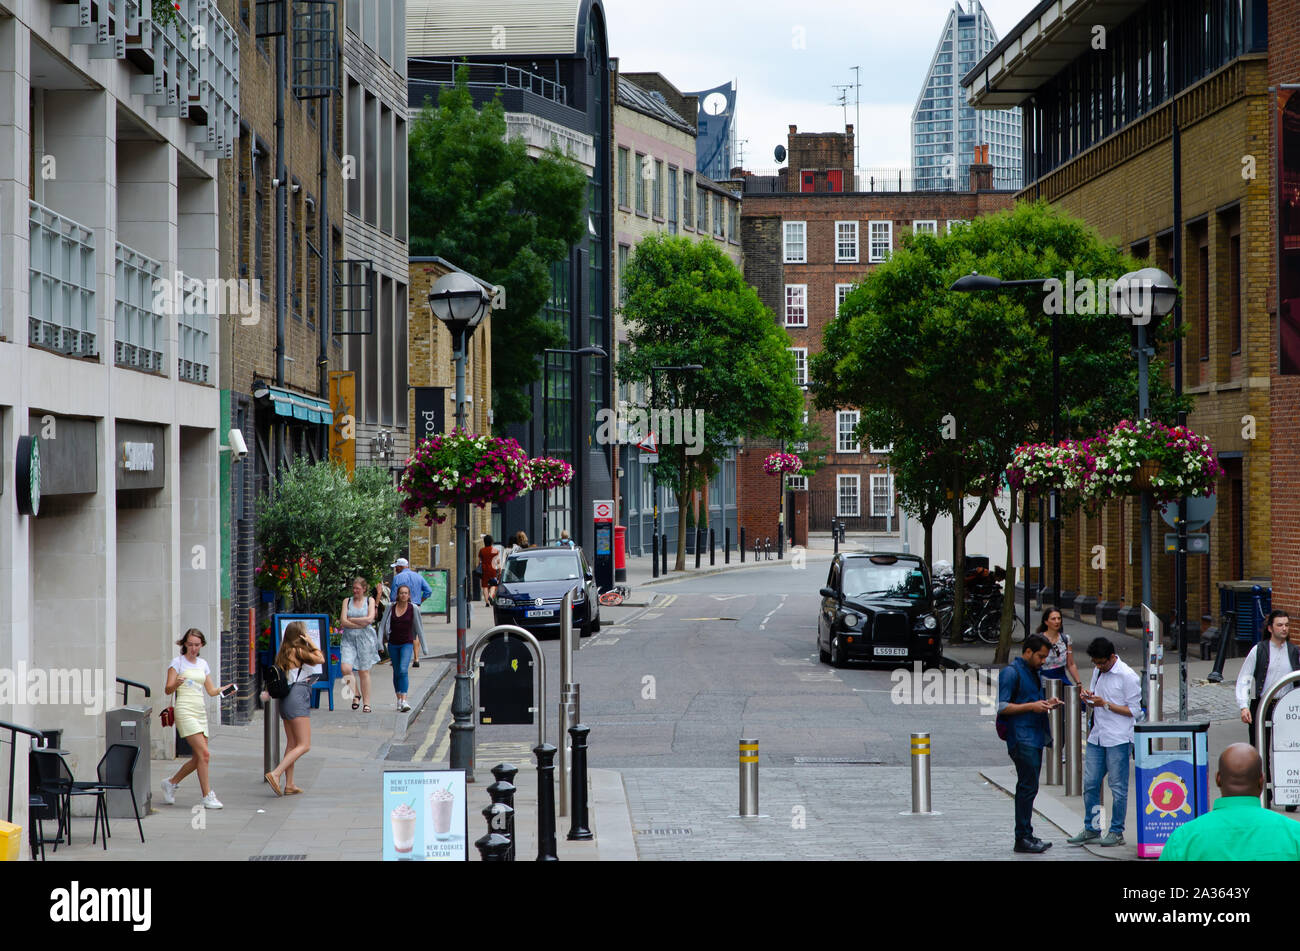 Beautiful London street with flowers, people, green trees and parked black cab. Photo shows 'New Globe walk' street, near Shakespeare's Globe Theatre Stock Photo